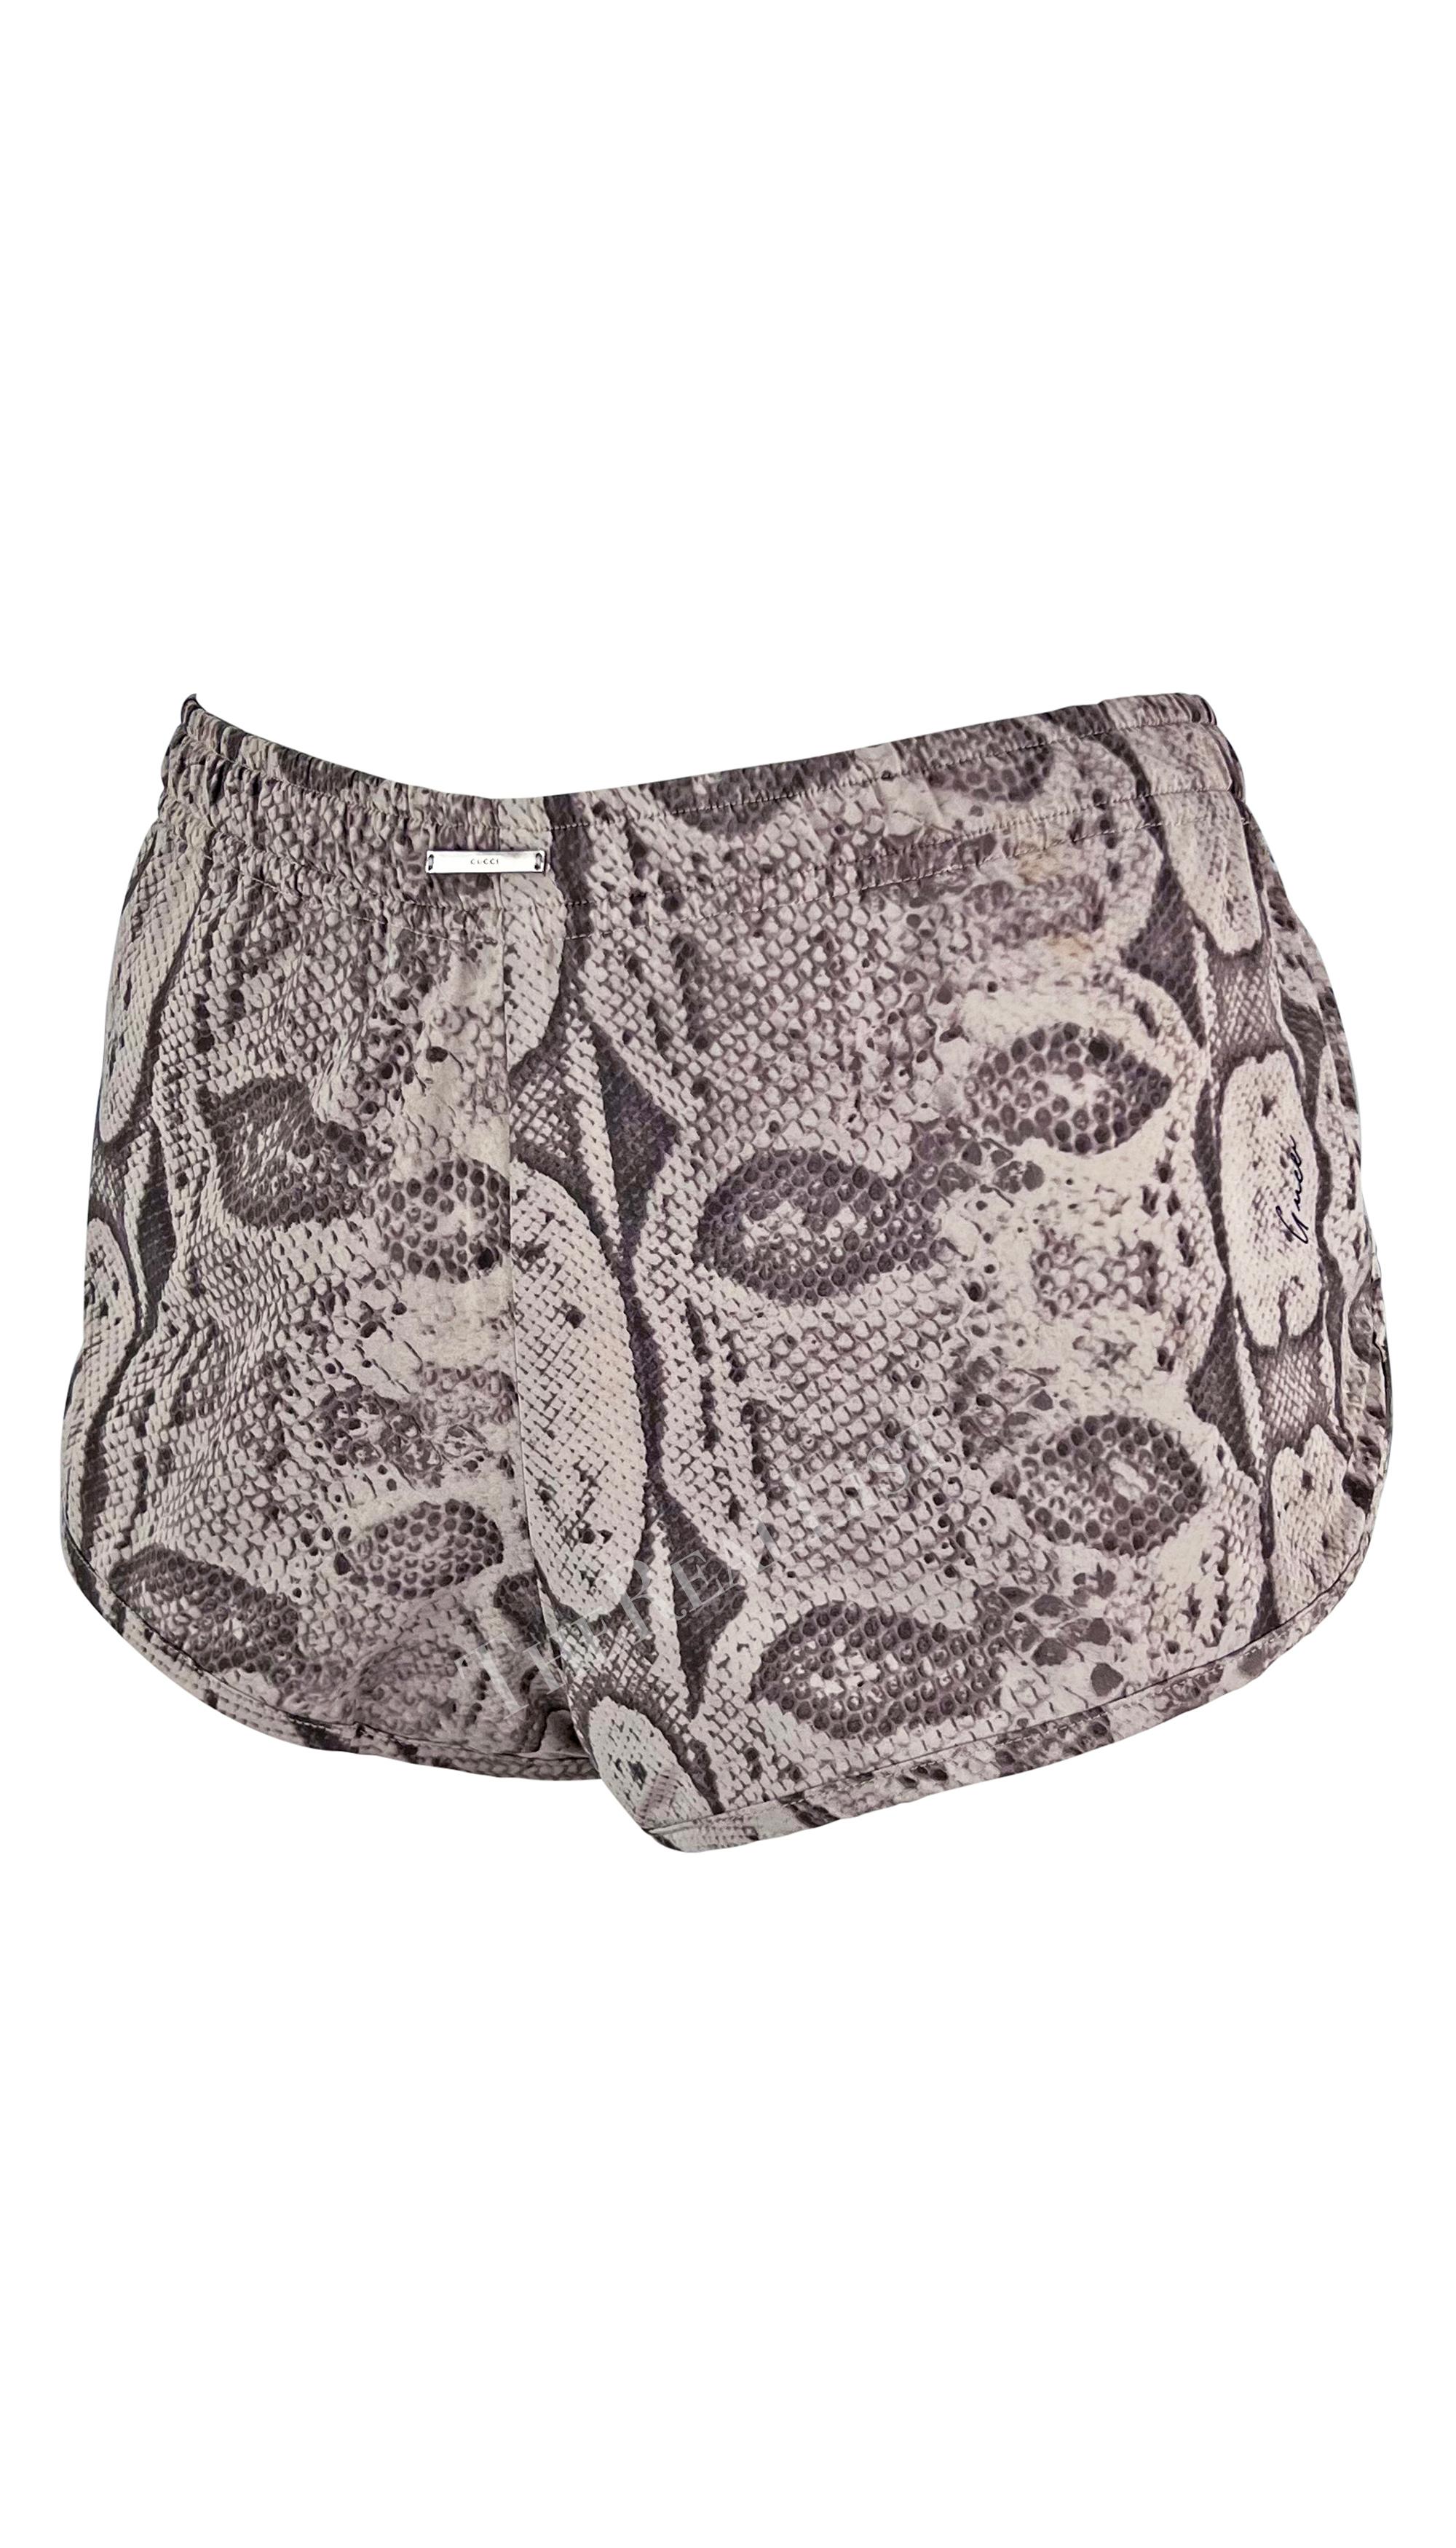 Women's S/S 2000 Gucci by Tom Ford Runway Snake Skin Print Mini Shorts For Sale